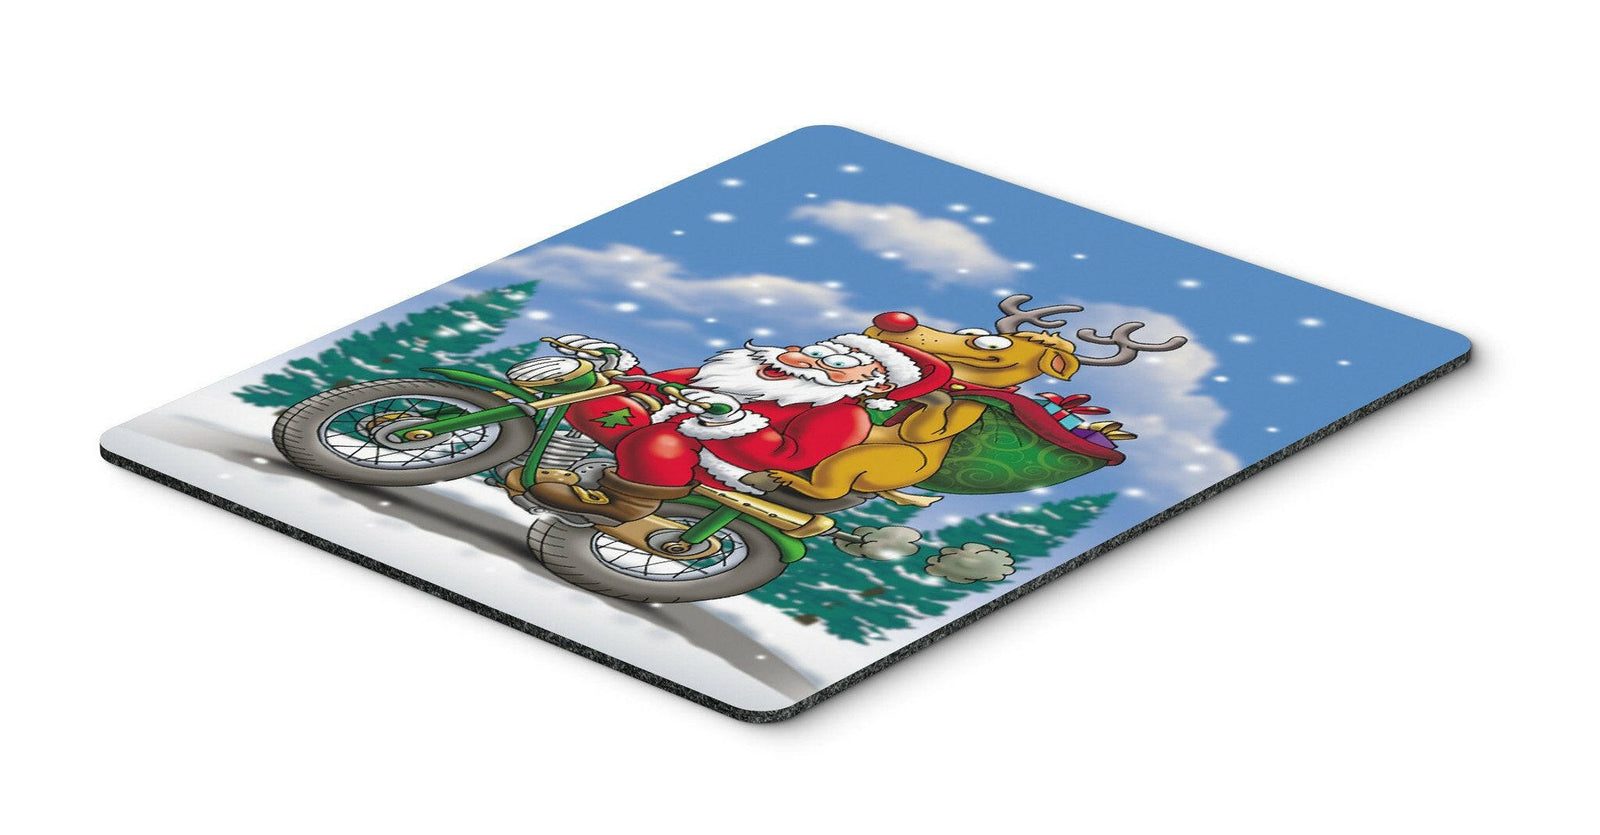 Christmas Santa Claus on a Motorcycle Mouse Pad, Hot Pad or Trivet APH8996MP by Caroline's Treasures